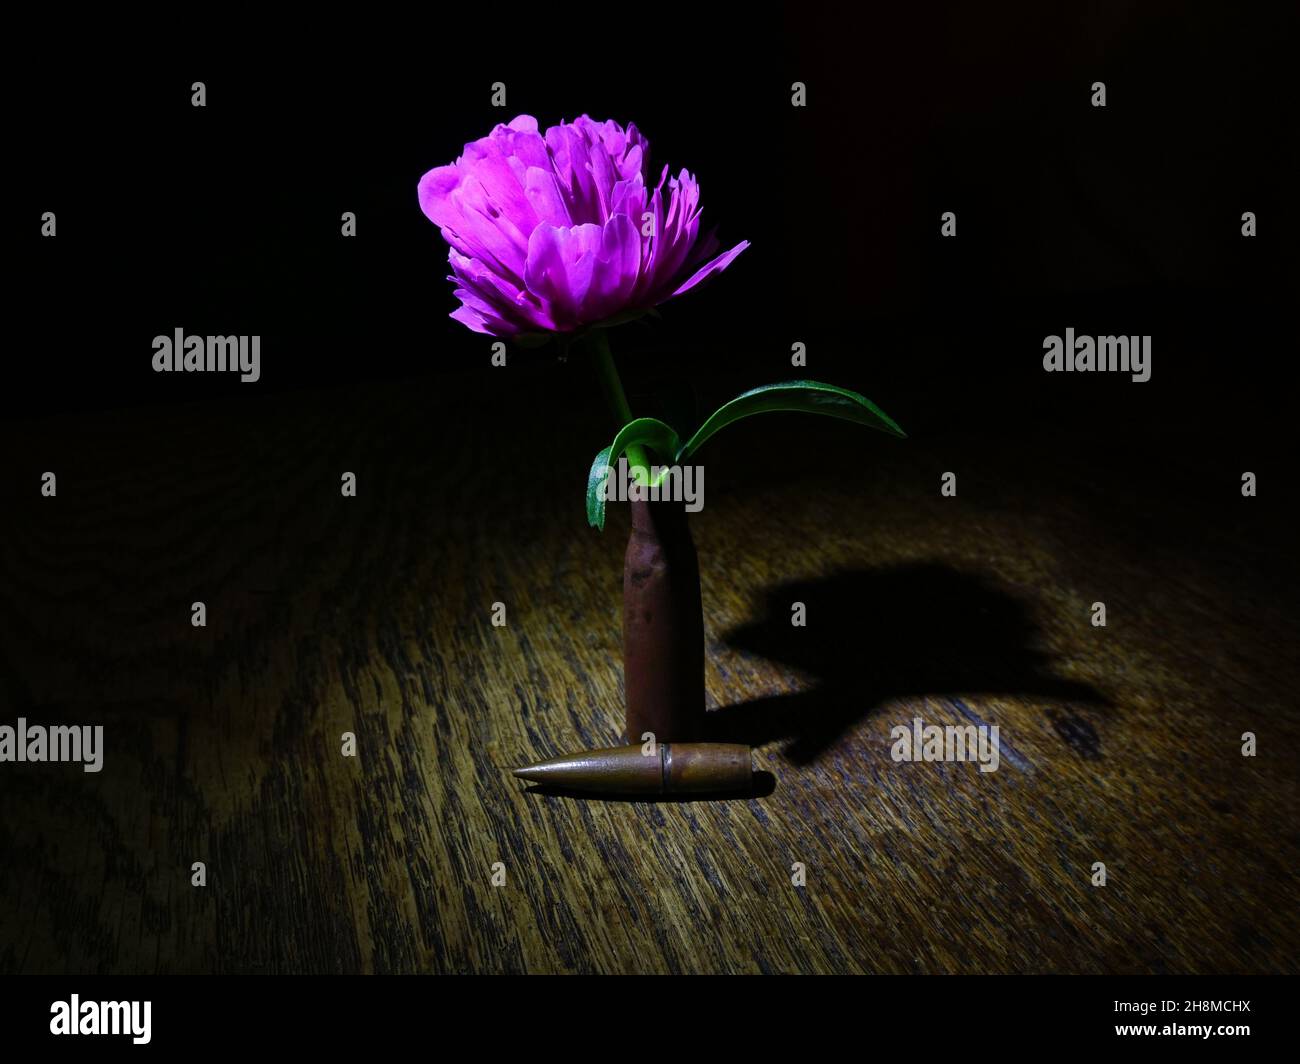 A purple flower in a bullet shell in the darkness Stock Photo